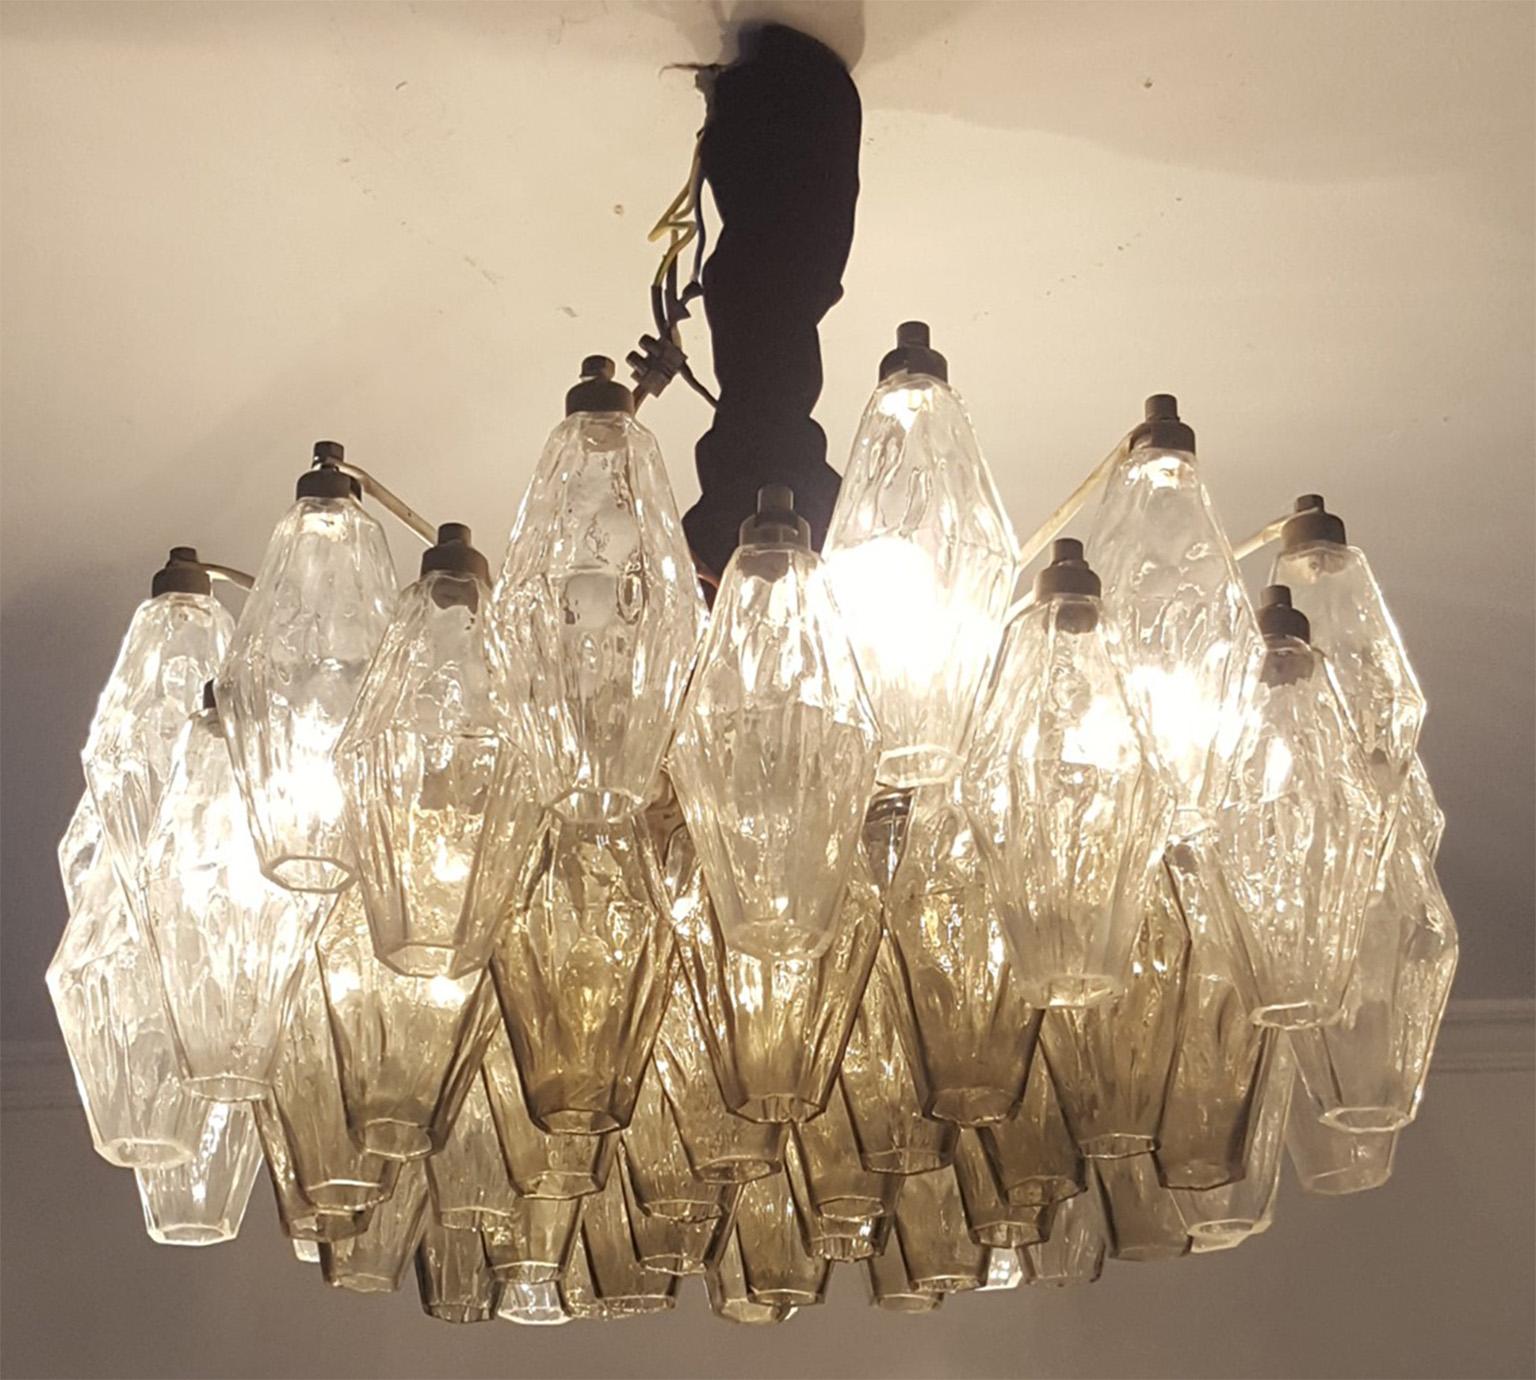 Two original Venini chandeliers manufactured in Murano glass; 
Model Poliedri in two colors with the core part in grey colored Poliedri,
 produced in Venice and designed by Carlo Scarpa. 
 The glass body has 51 cm of diameter and 30 height. Plus